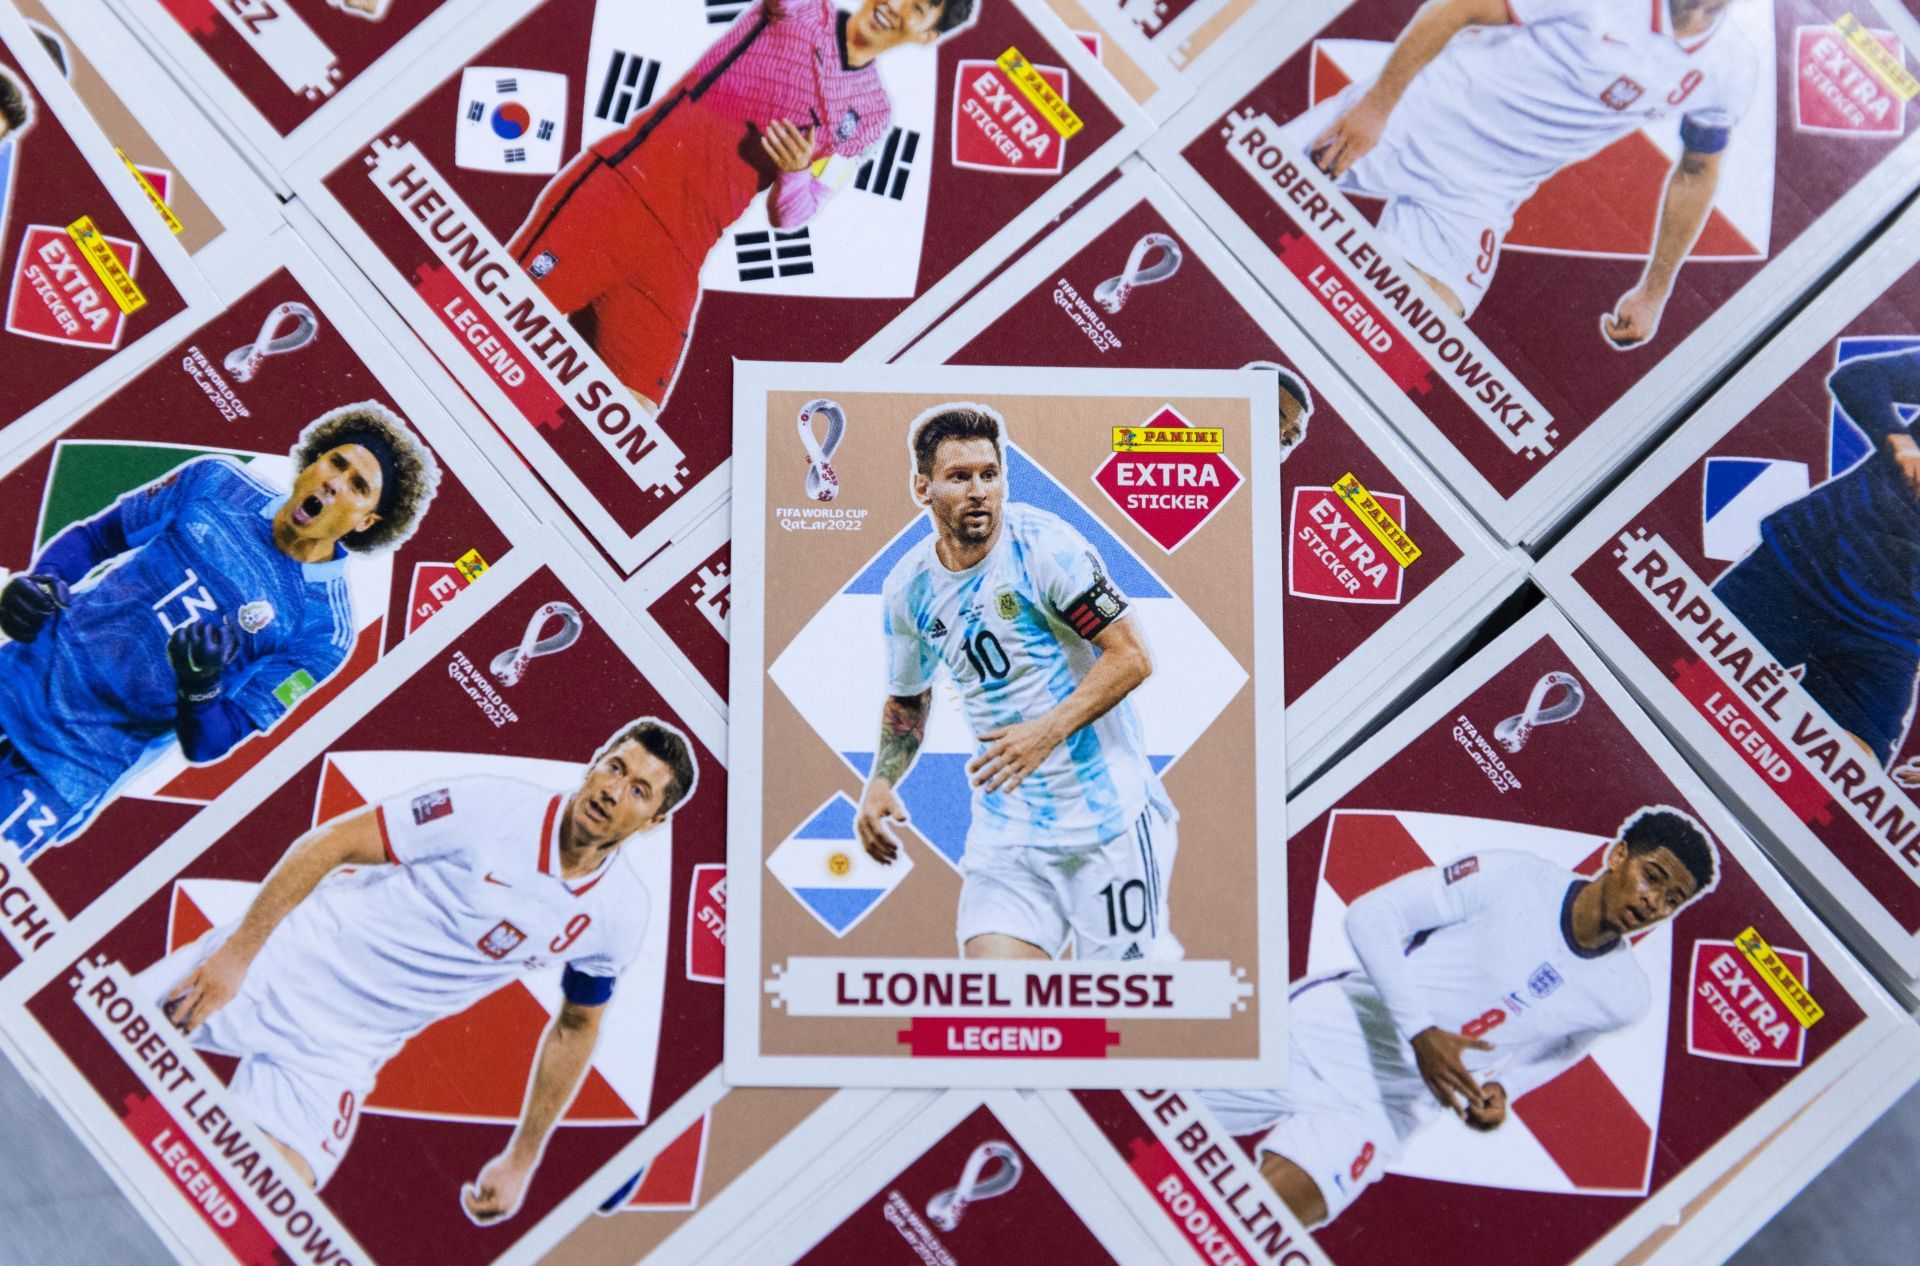 Panini Hub in Sao Paulo distributes football sticker amid World Cup Fever: PSG superstar Lionel Messi.